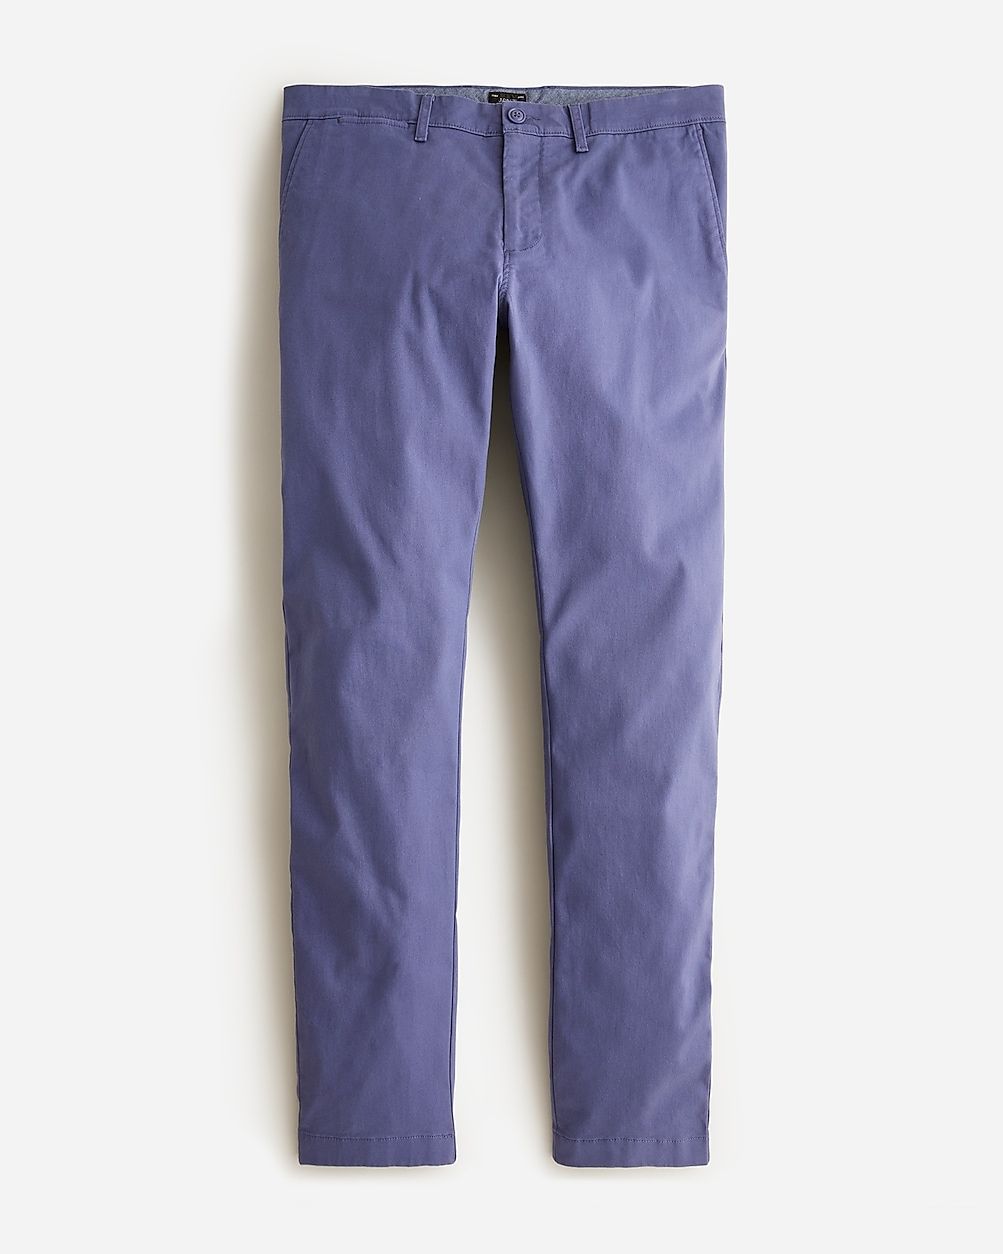 Limited-time Chinos Deal. Price as marked. | J.Crew US